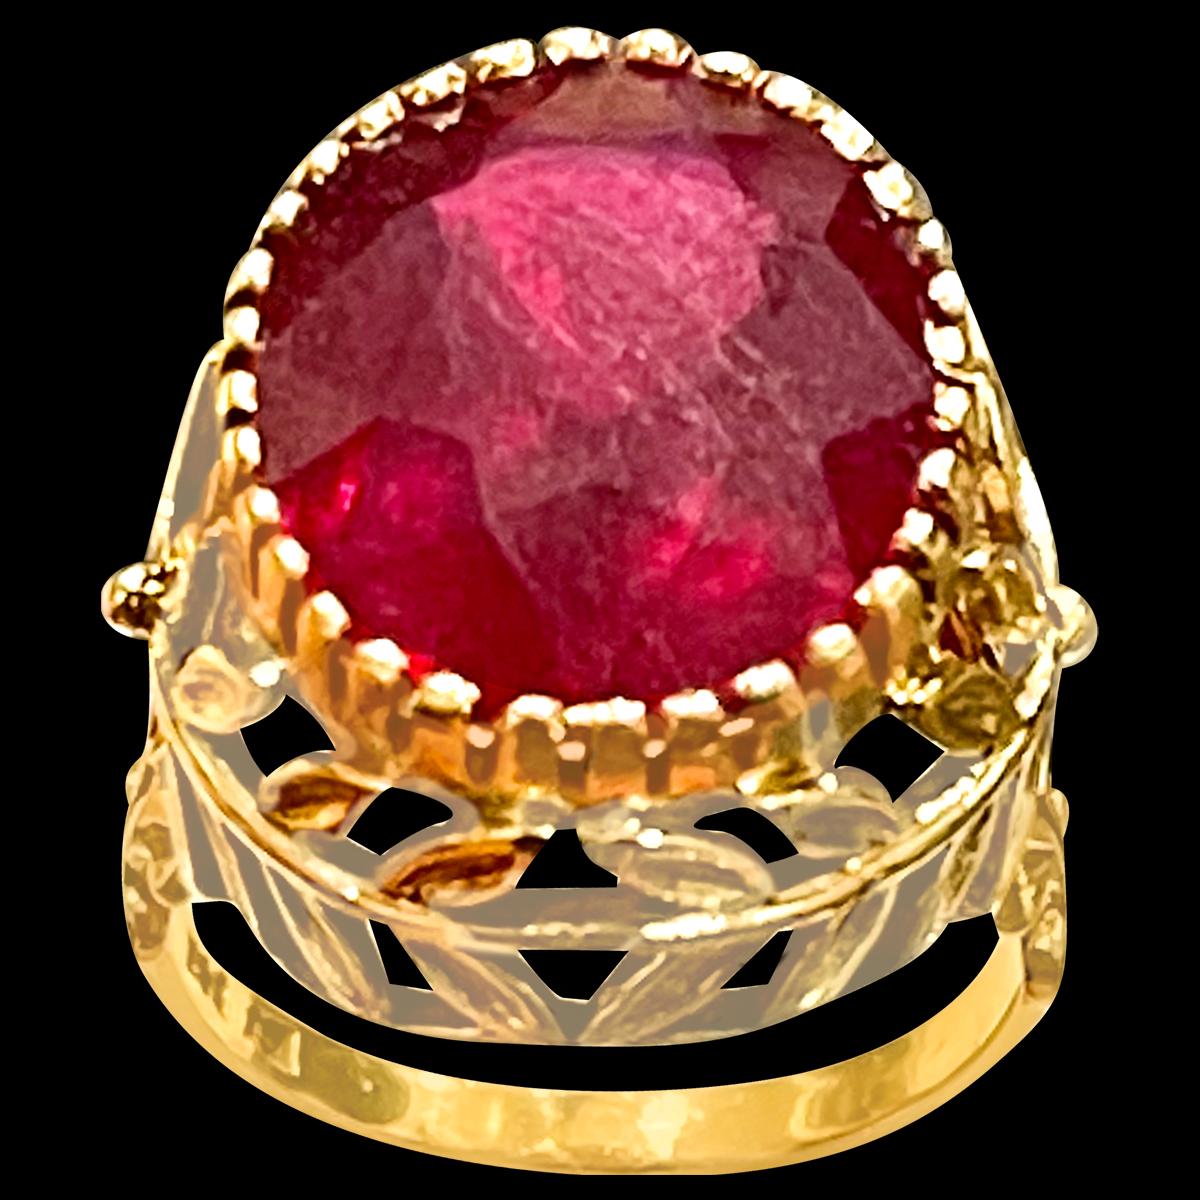 Oval Cut 8.5 Carat Treated Oval Ruby 14 Karat Yellow Gold Cocktail Ring, Vintage